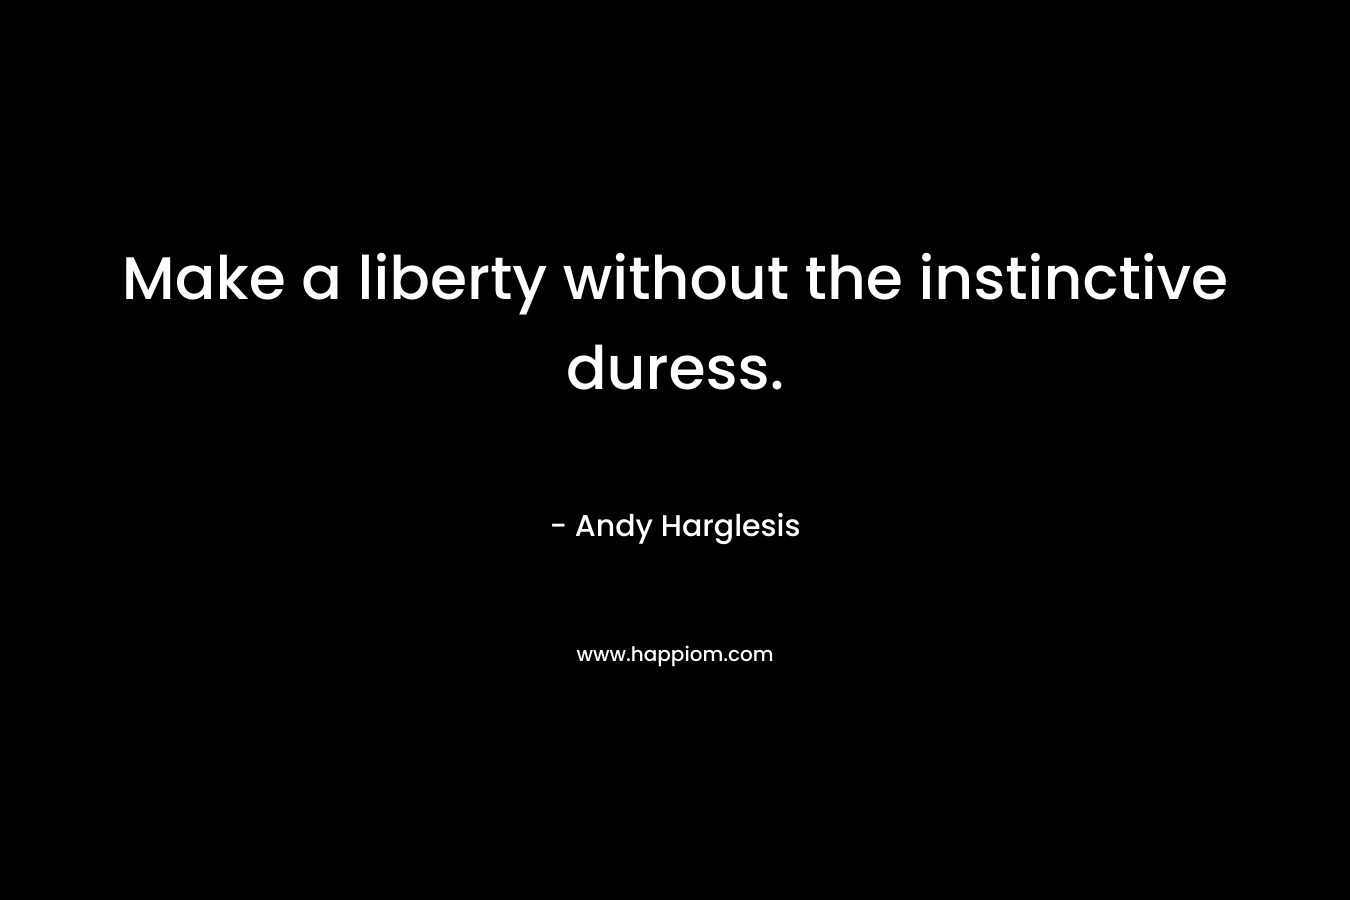 Make a liberty without the instinctive duress.